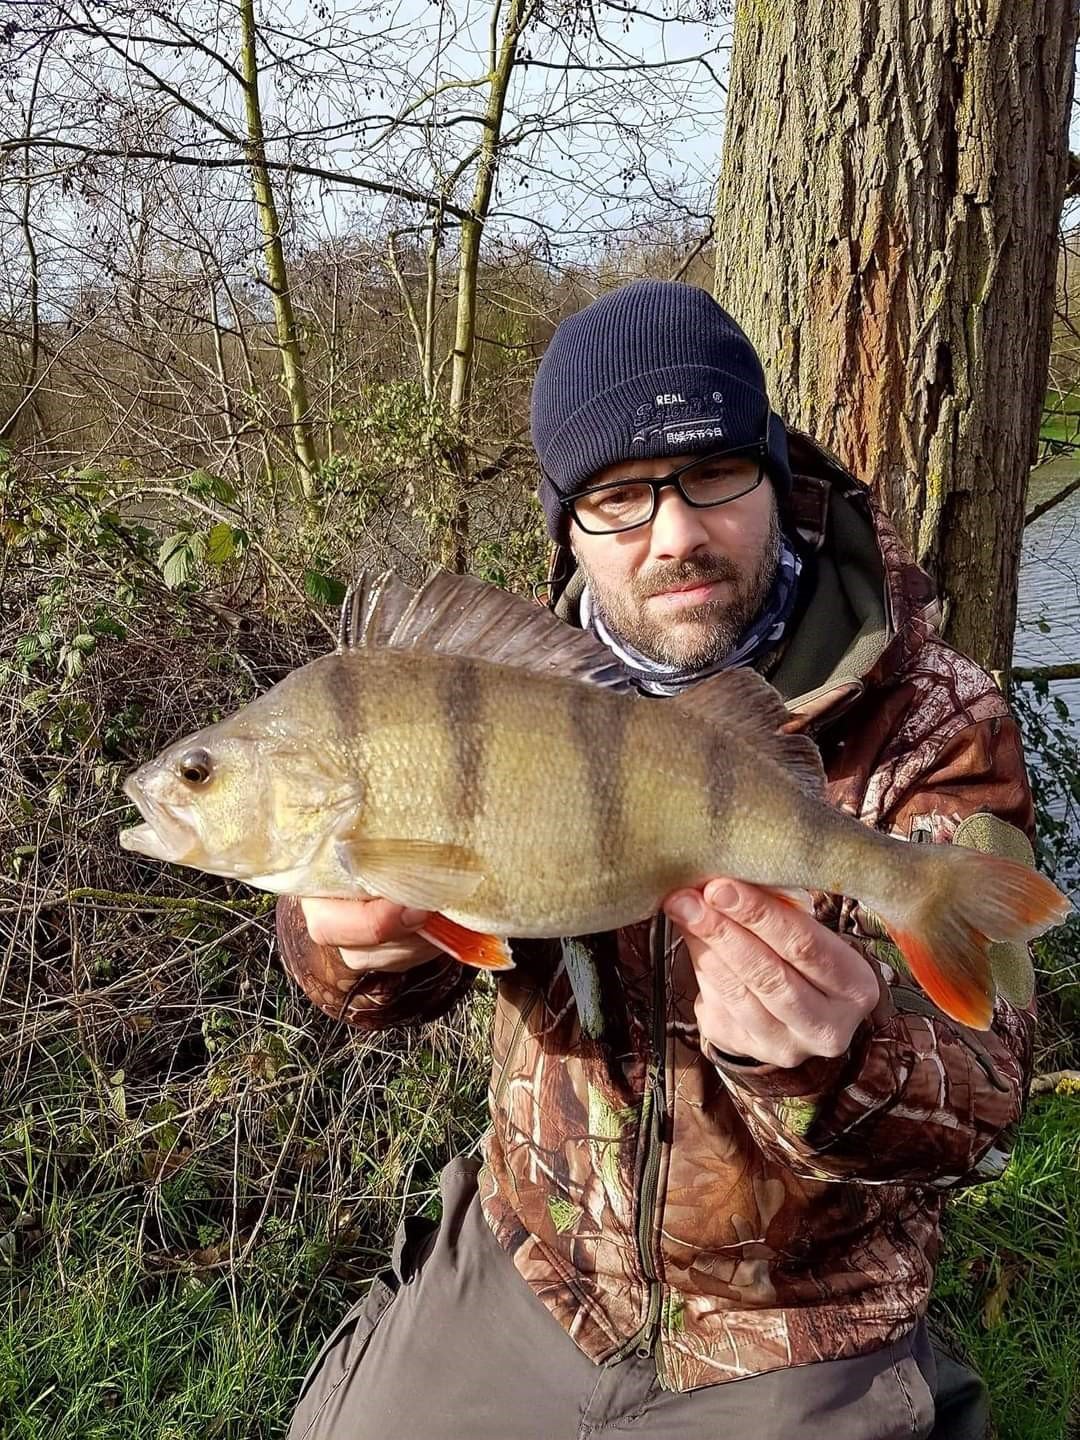 Martin with his 3lb plus Perch from Bucbricks